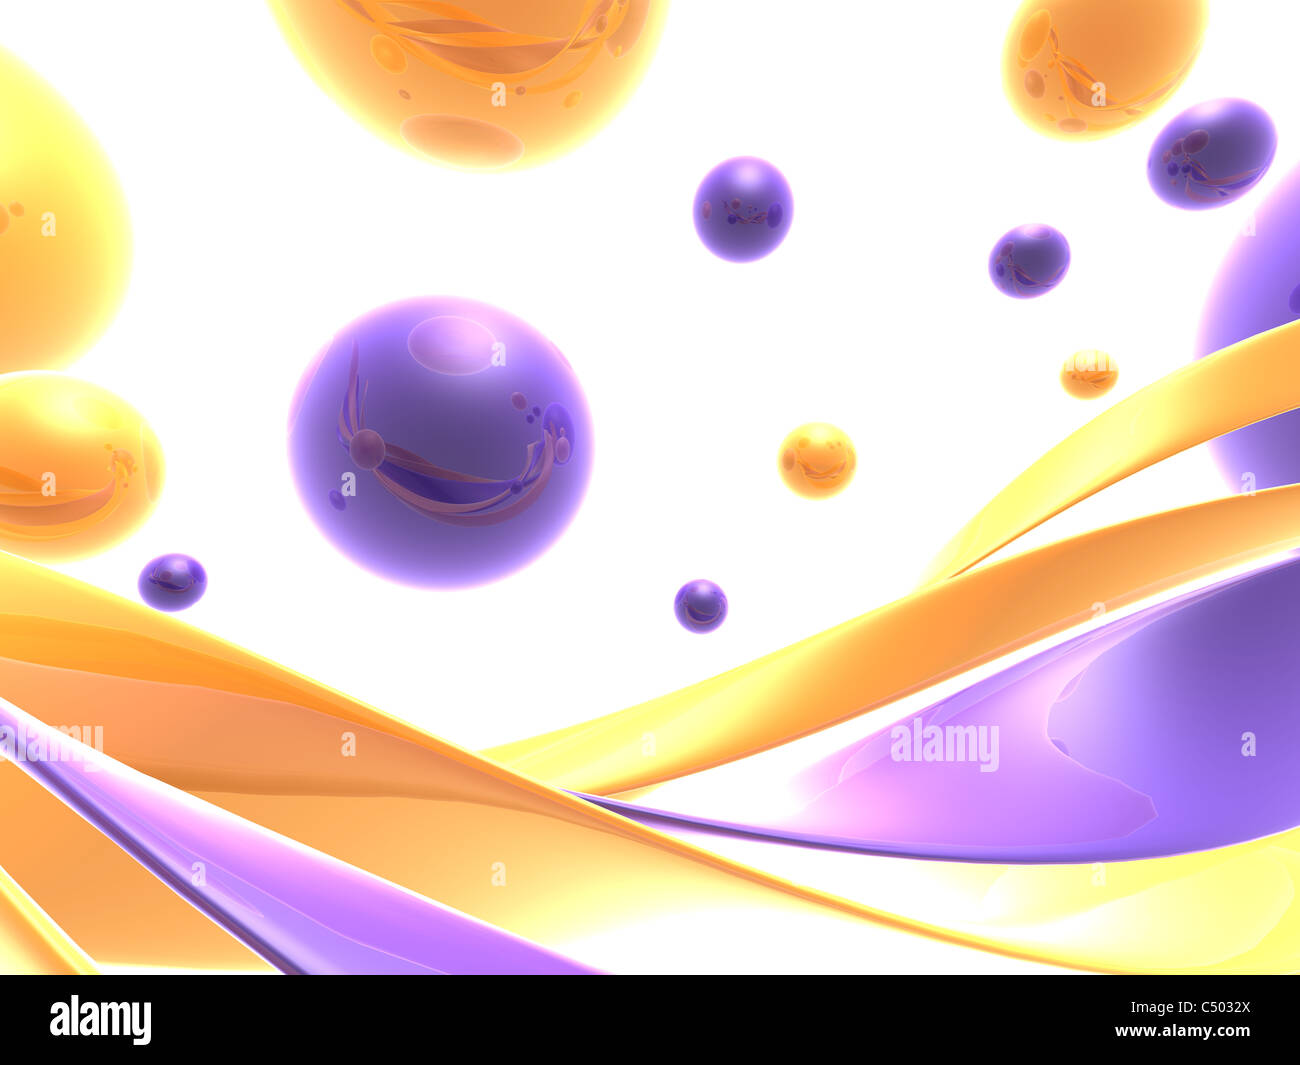 Abstract graphic Stock Photo